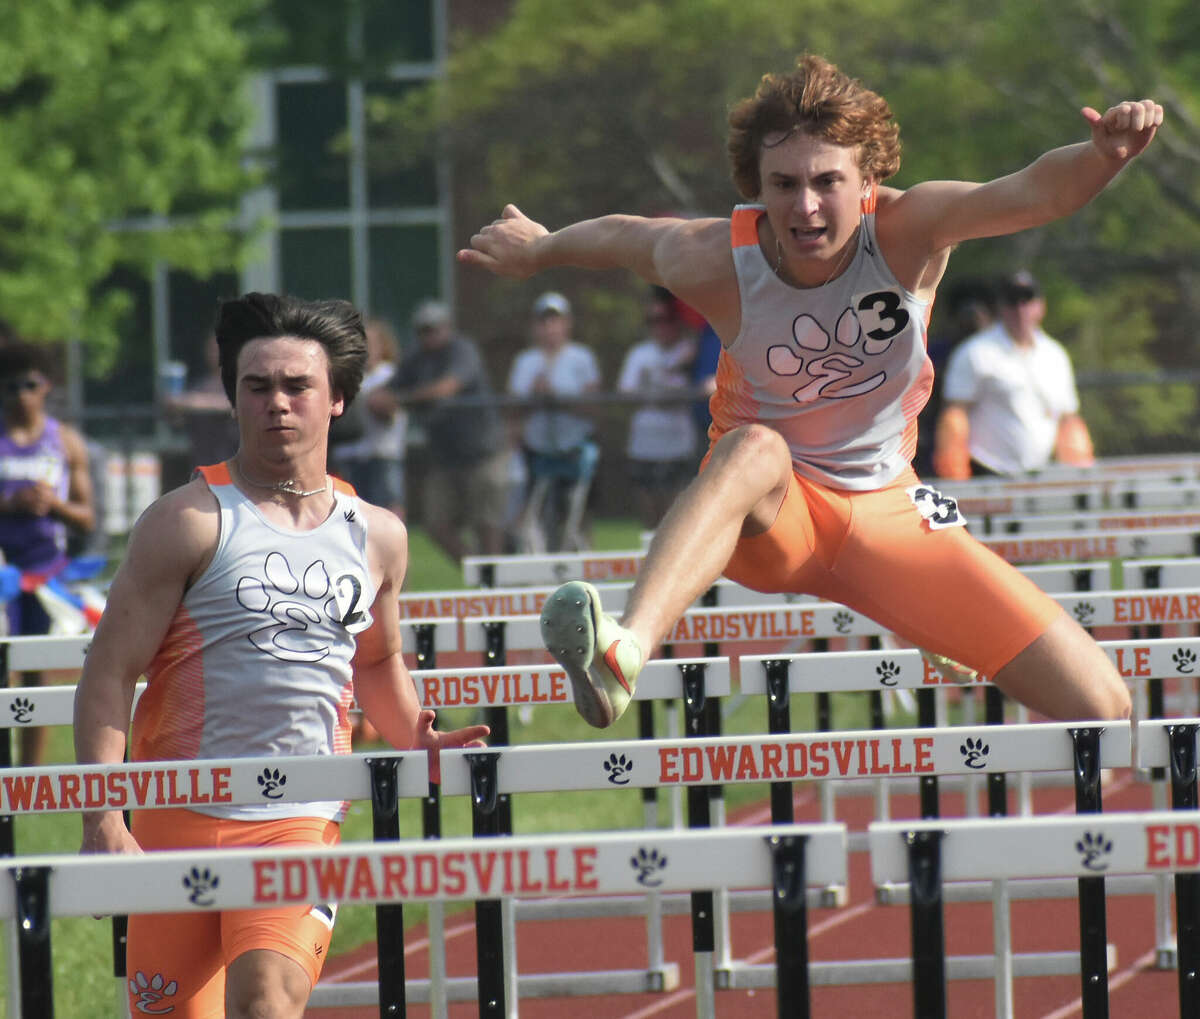 Edwardsville's Jake Curry, left, and Clayton Lakatos compete in the 110-meter hurdles during the Southwestern Conference Meet at the Winston Brown Track and Field Complex on Wednesday in Edwardsville.